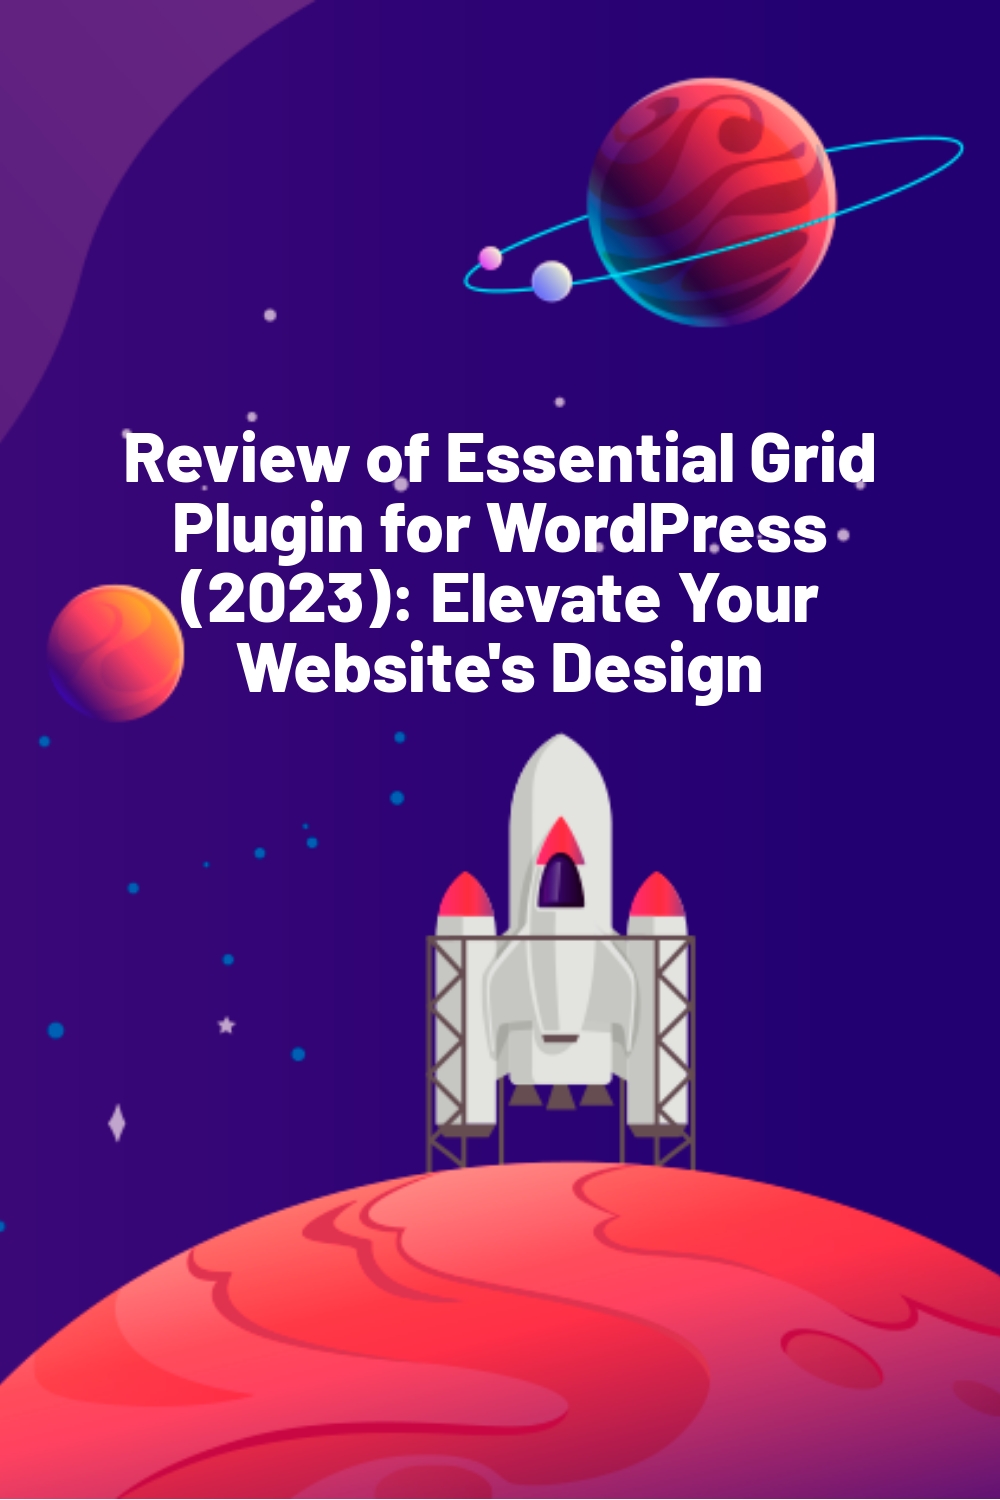 Review of Essential Grid Plugin for WordPress (2023): Elevate Your Website’s Design